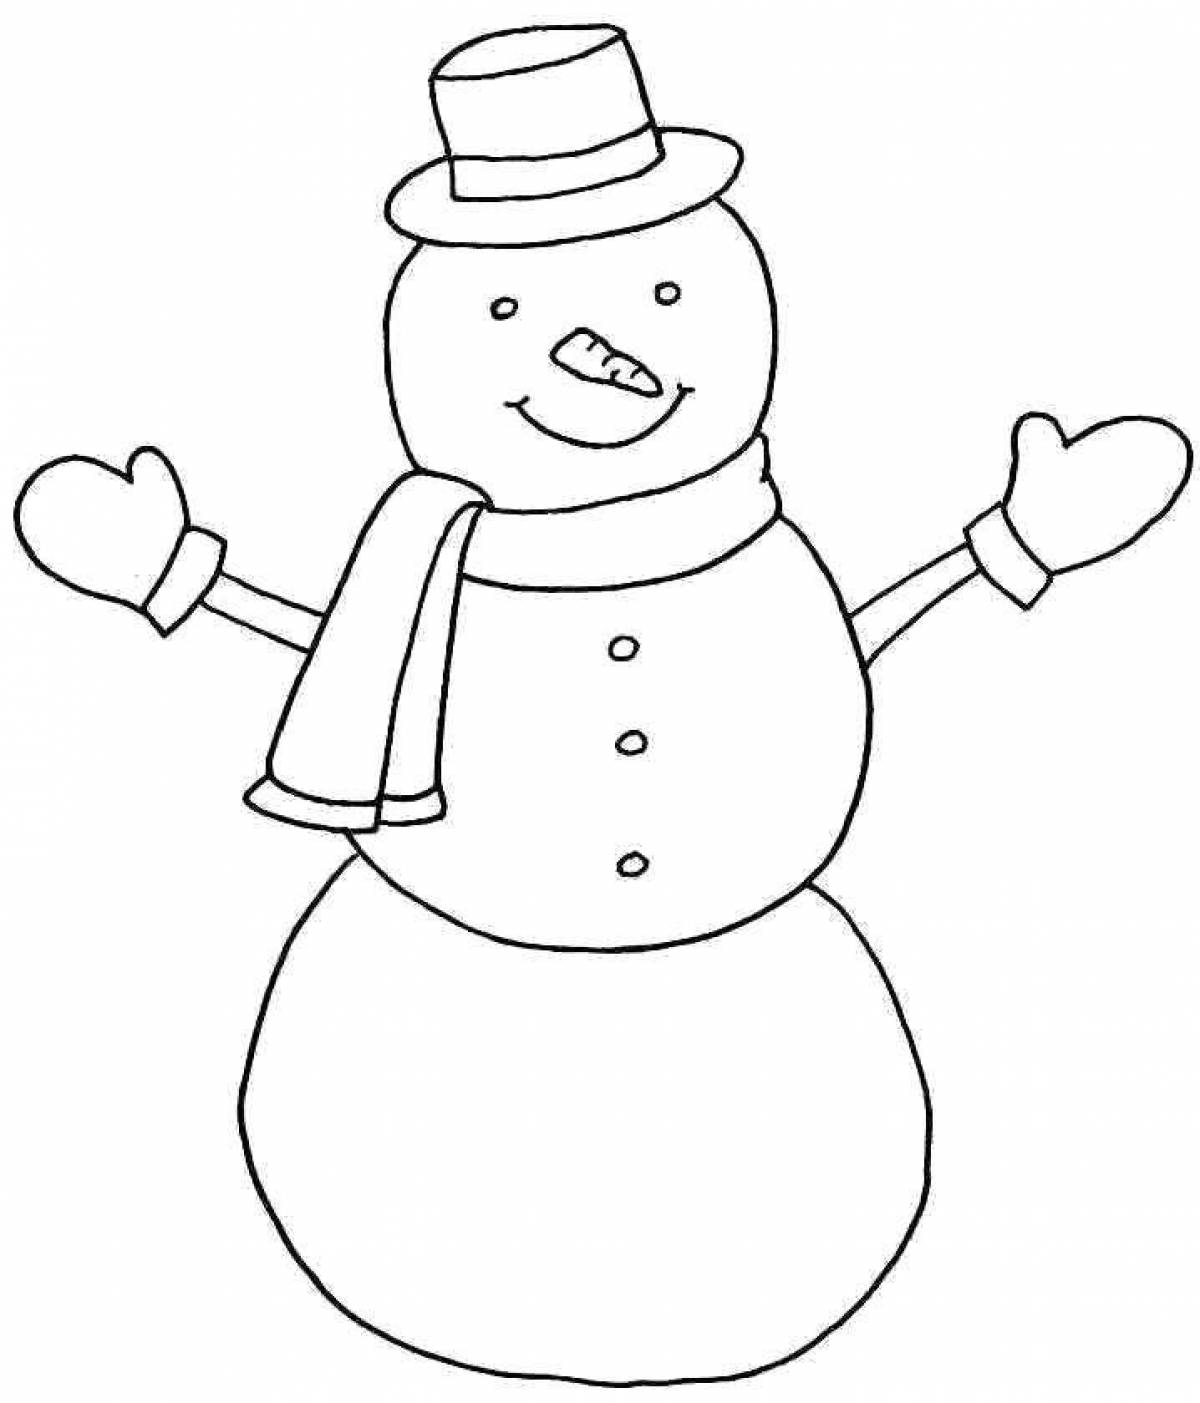 Shiny snowman coloring book in color